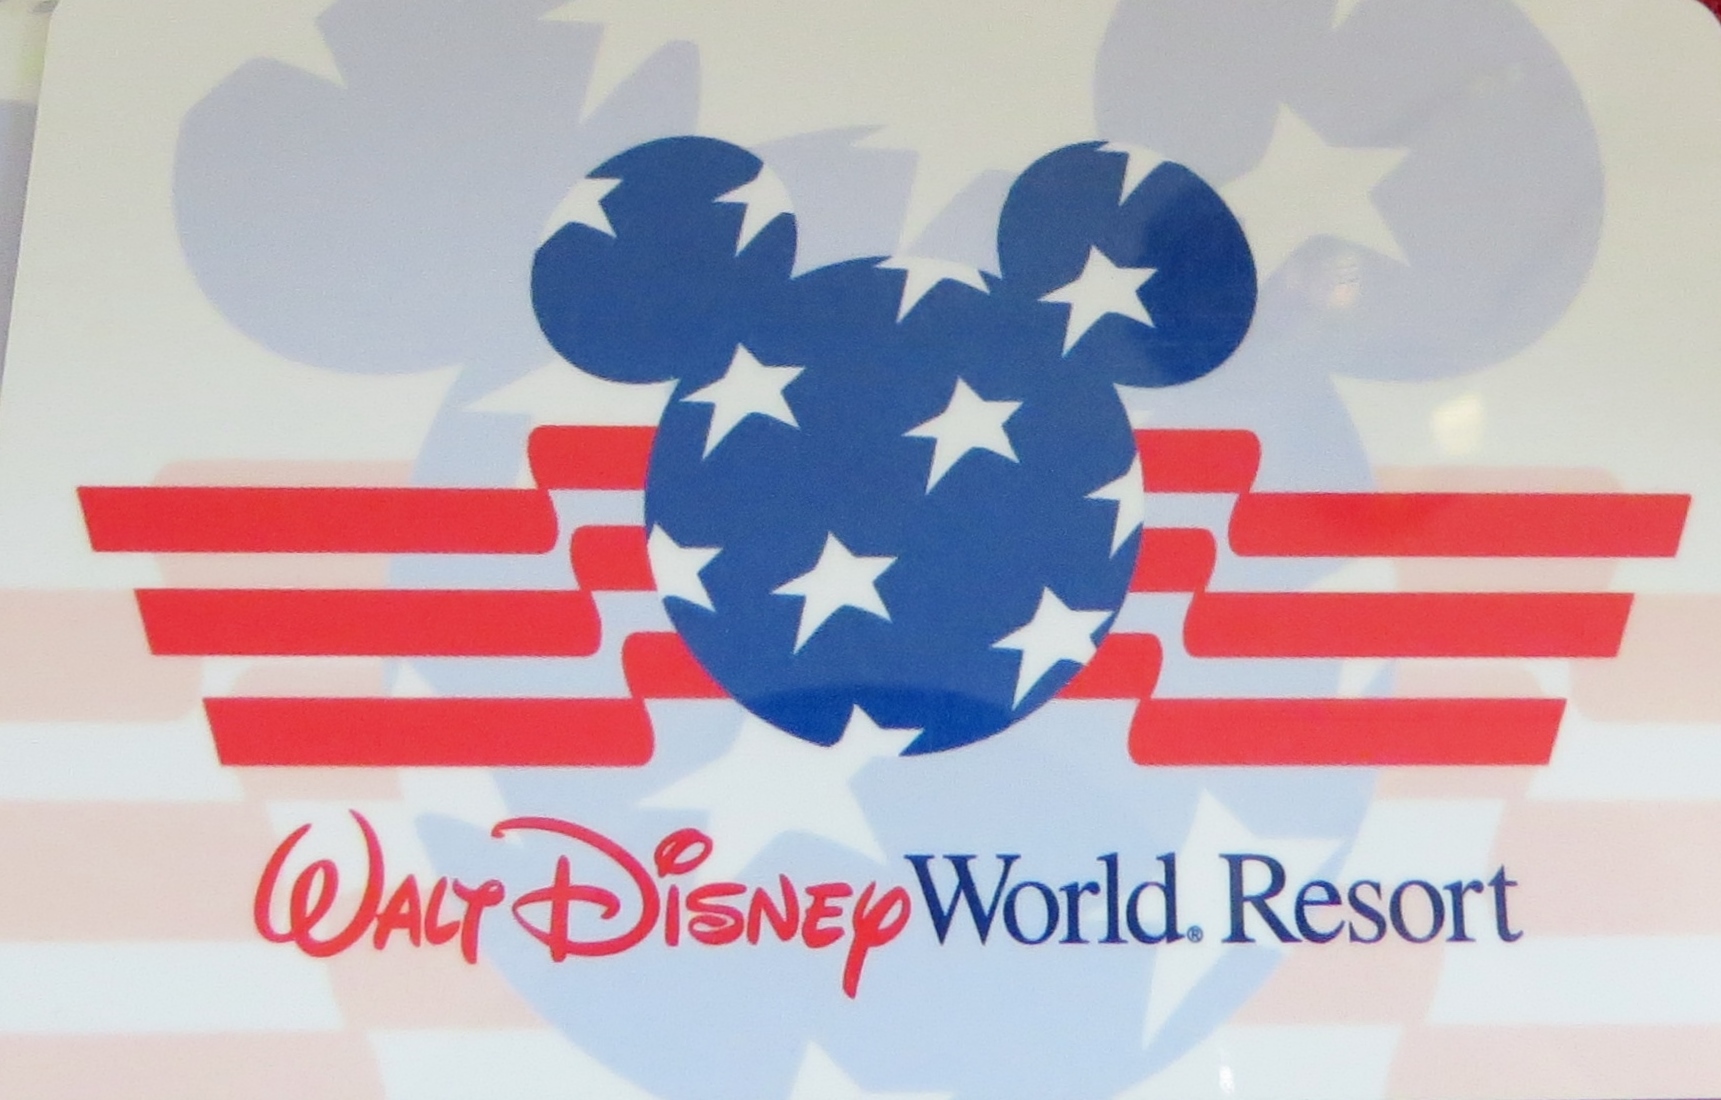 The 2018 Disney Military Discounts Have Been Announced!! Salute and Thanks to the Disney Travel Company.